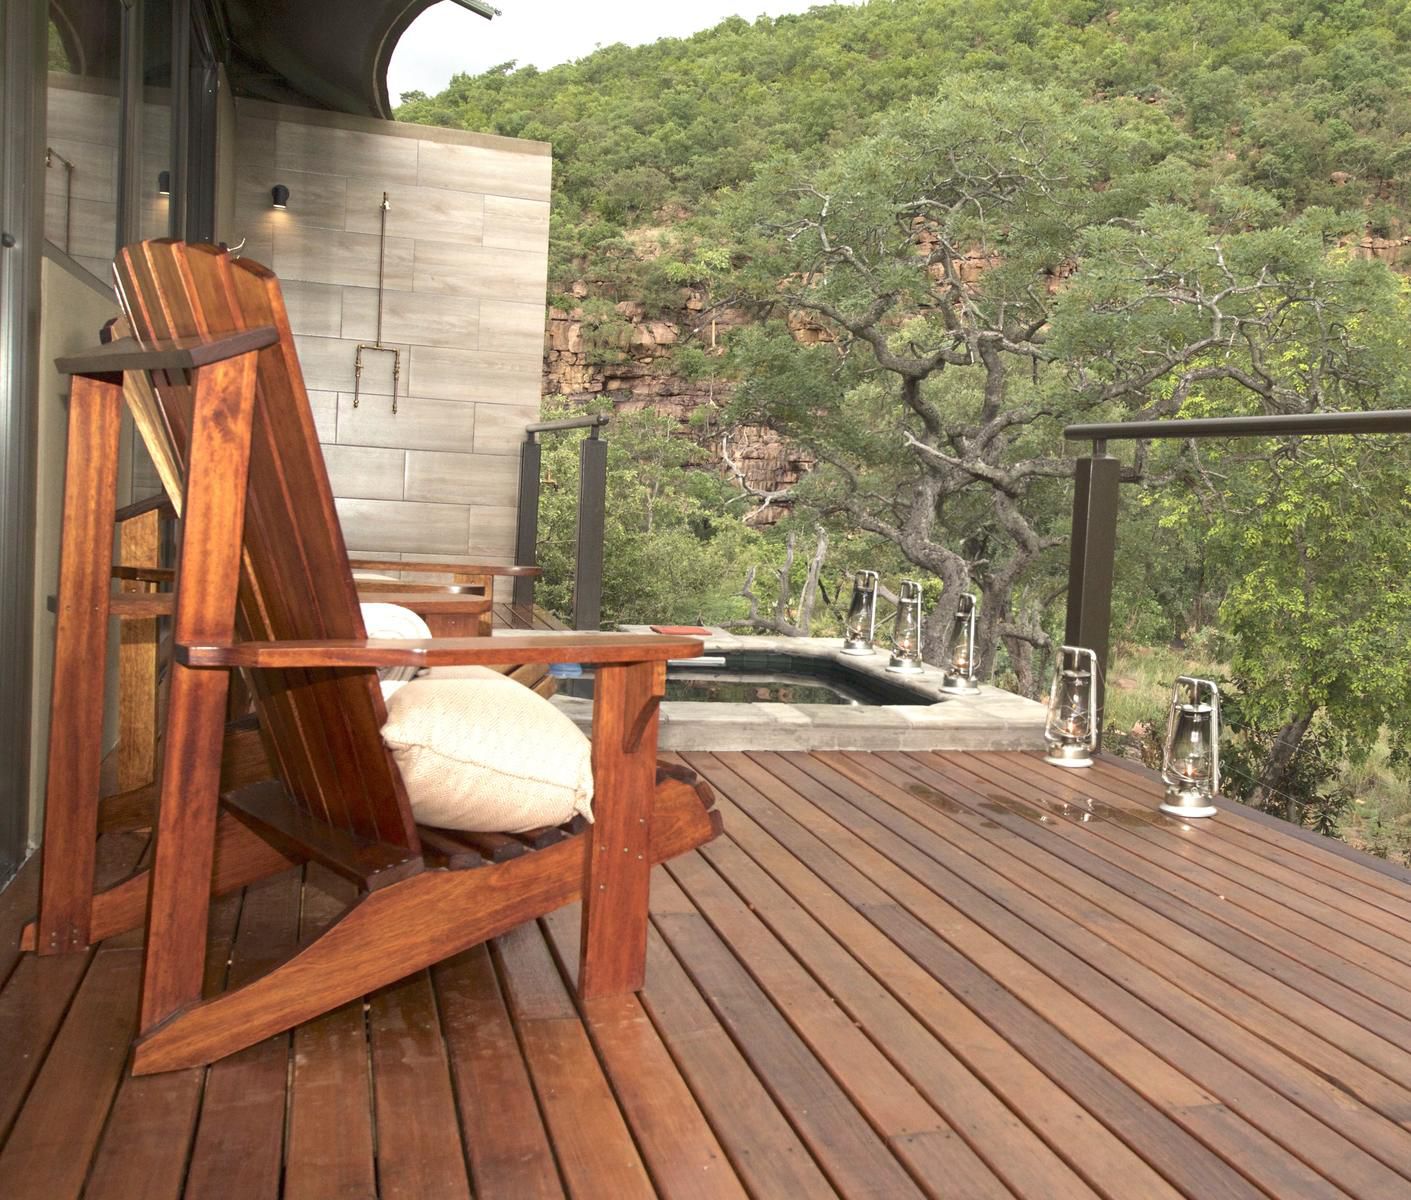 Inzalo Safari Lodge Welgevonden Game Reserve Limpopo Province South Africa 